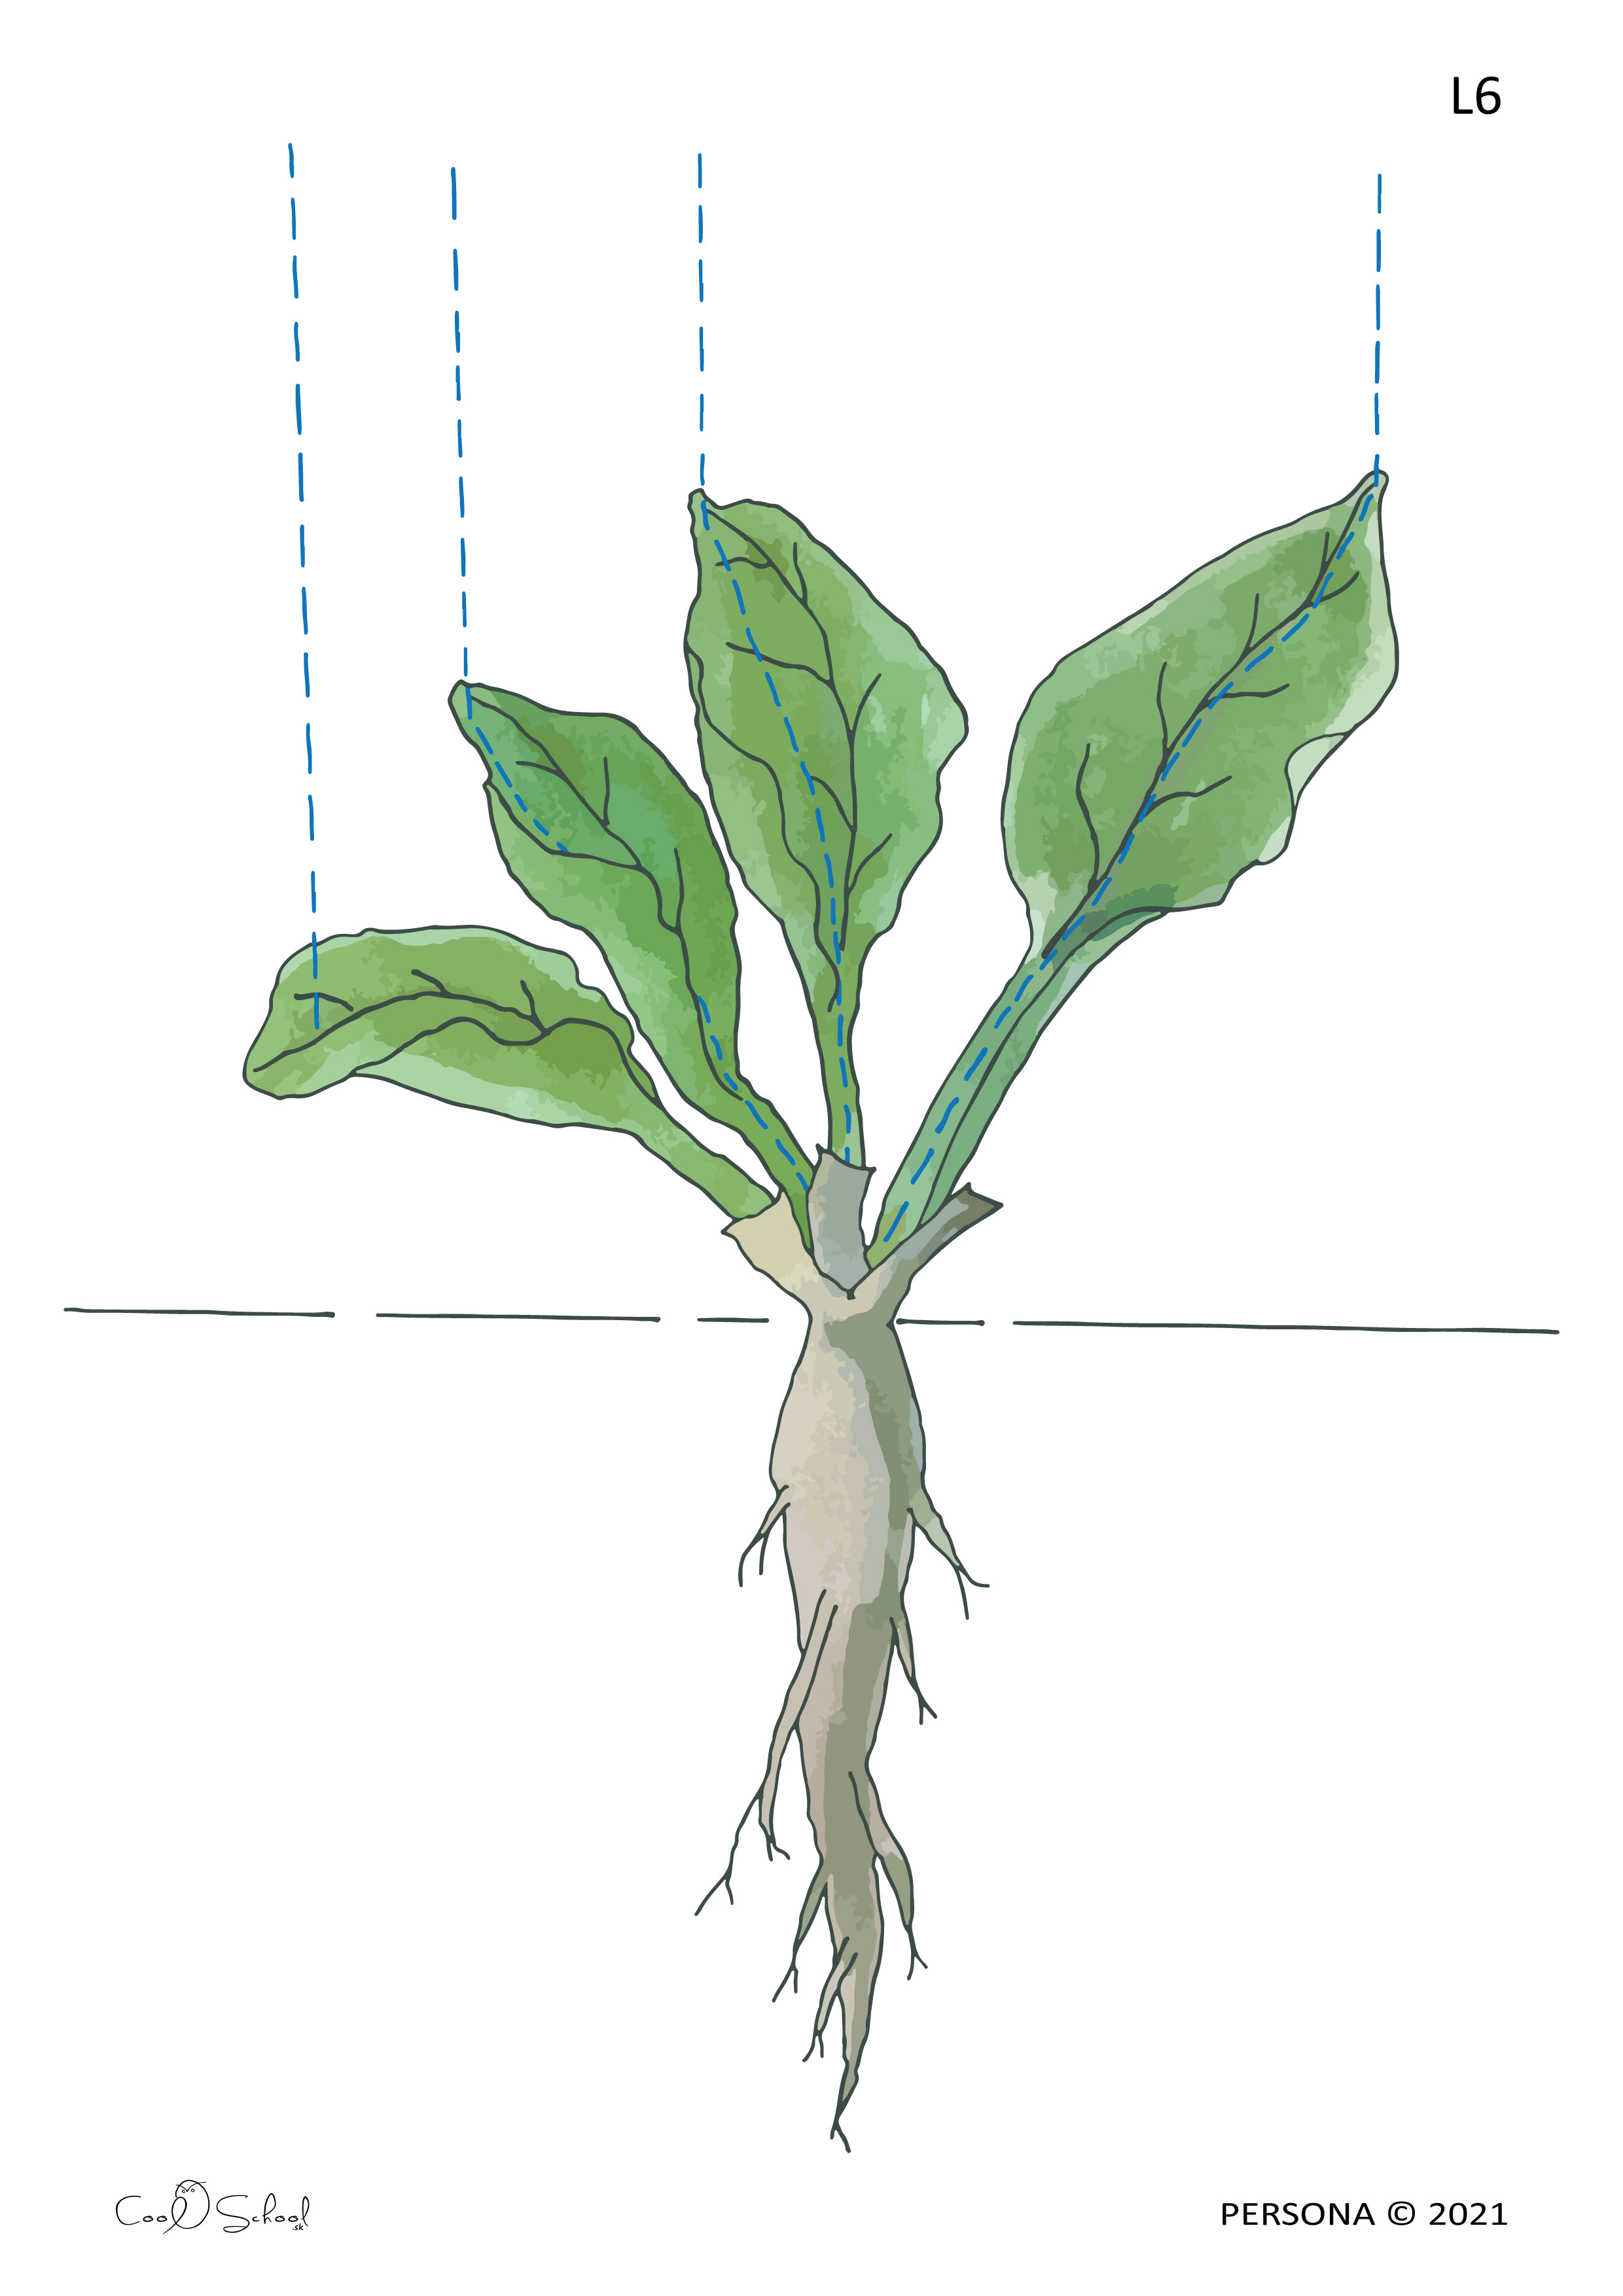 Leaves and roots work together / The Width of the Root